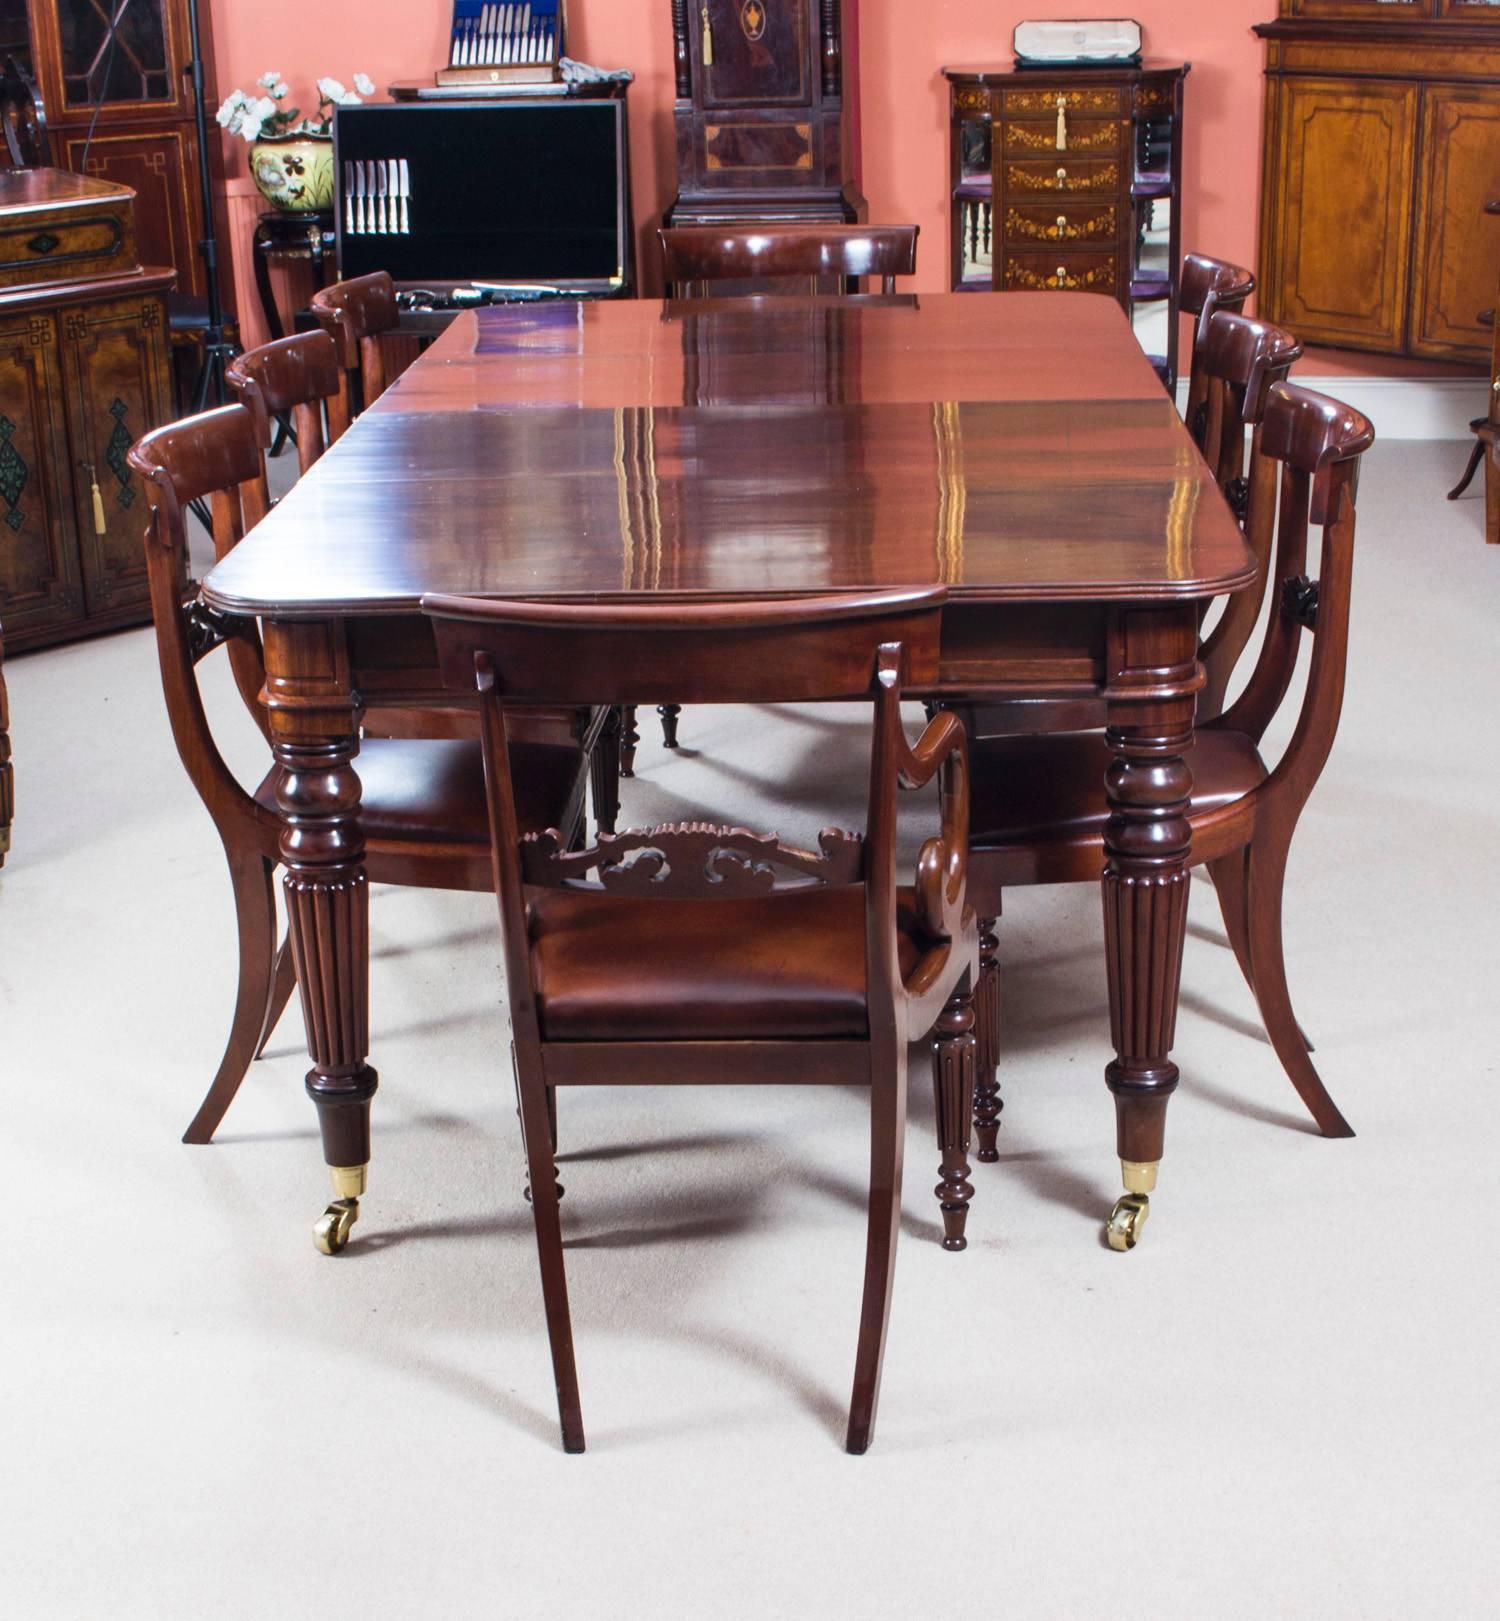 A very rare opportunity to own an antique English Regency dining room table in the manner of Gillows, circa 1820 in date, with eight antique Regency dining chairs, also circa 1820 in date 

This amazing table has two original leaves, can sit eight